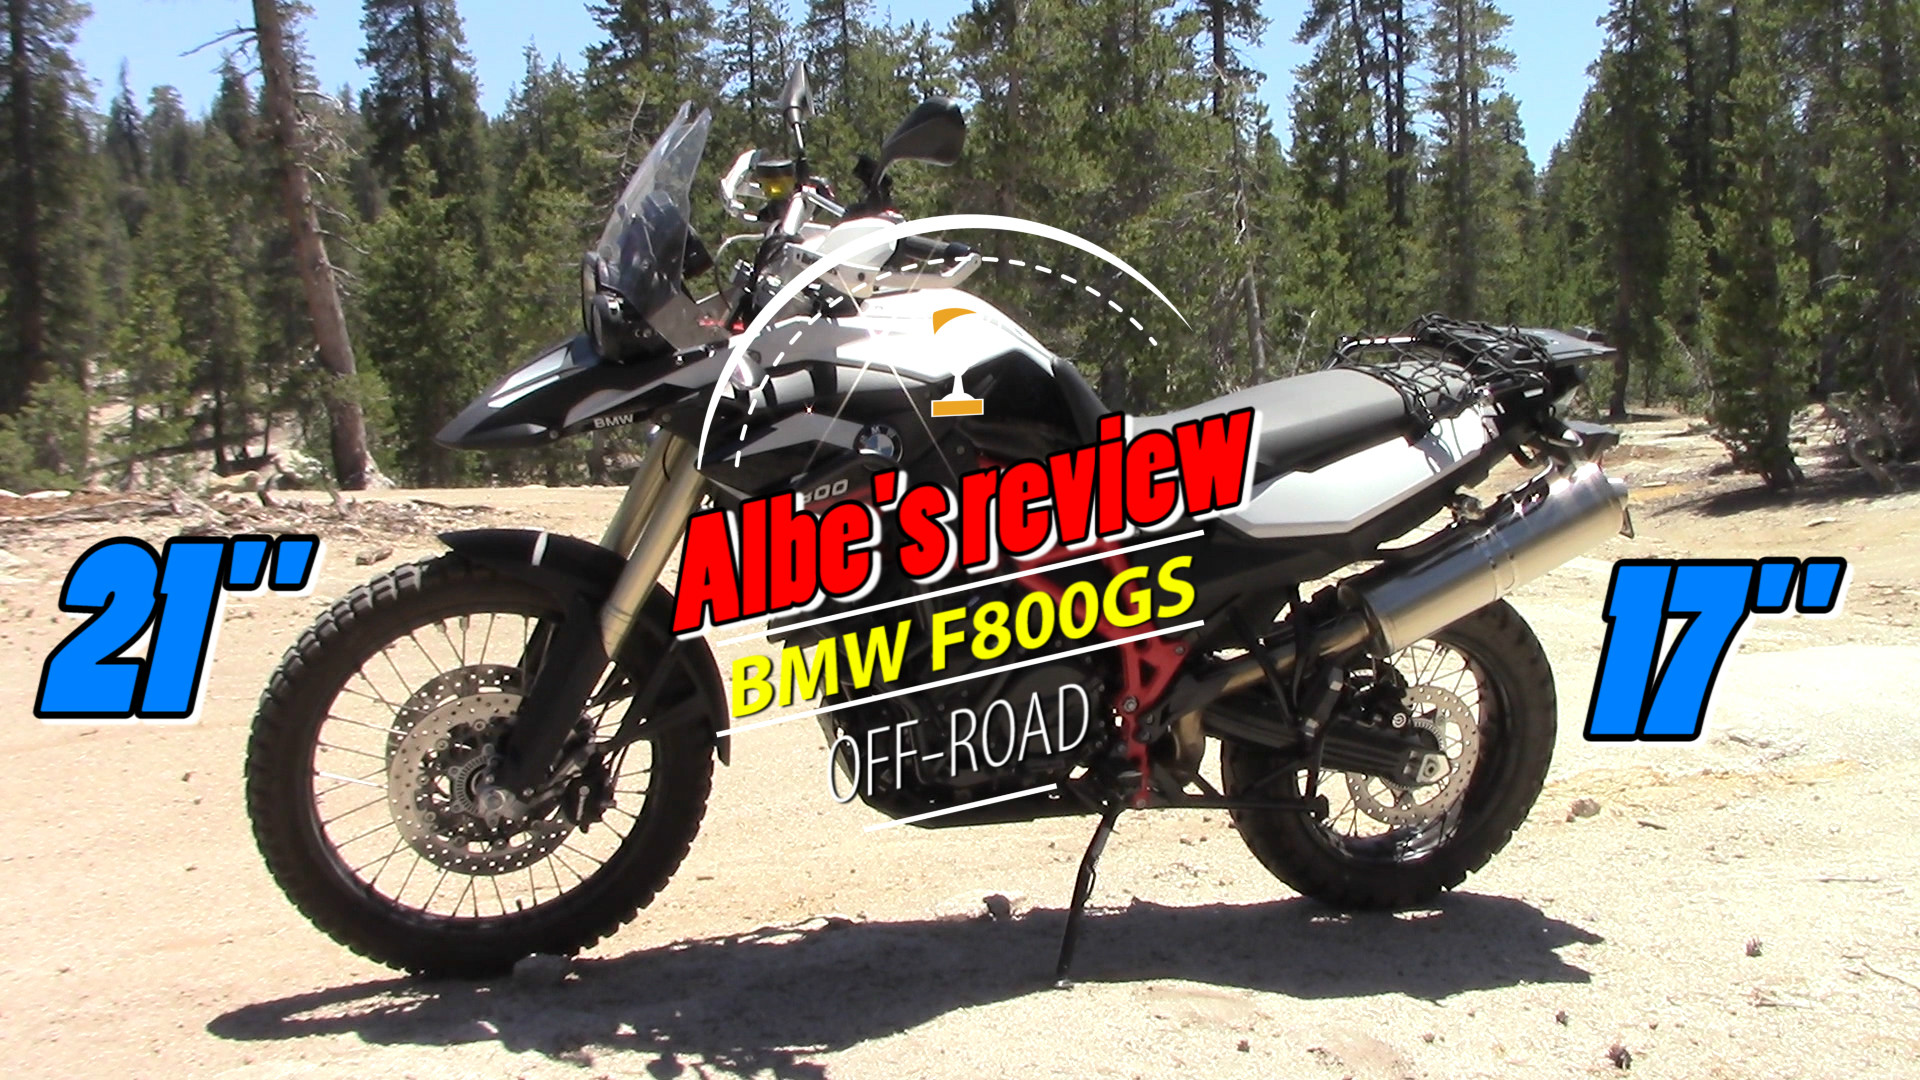 BMW F800GS, Albe's adv, adventure, motorcycle, off road, review